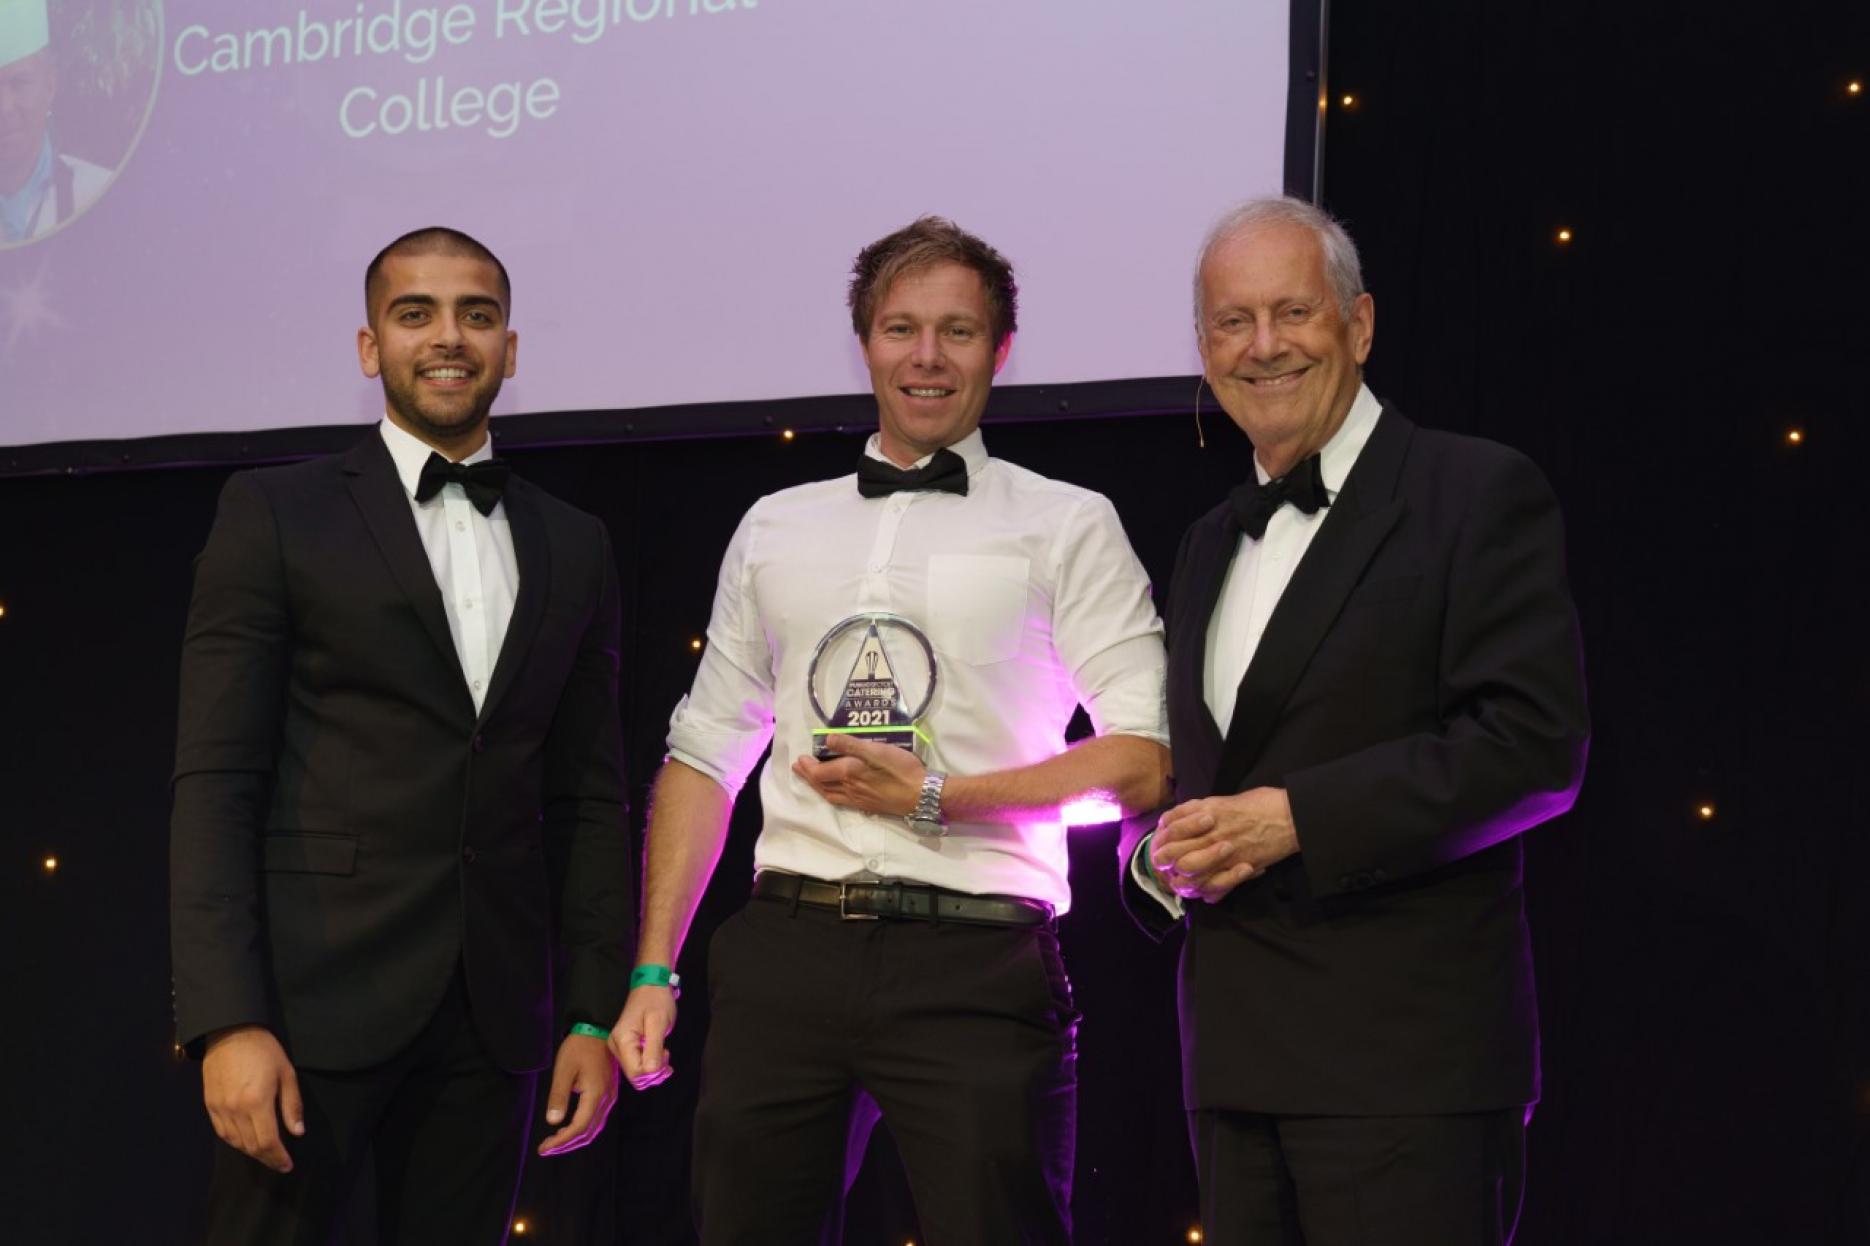 Graham Taylor from Cambridge Regional College won the Catering College Award.